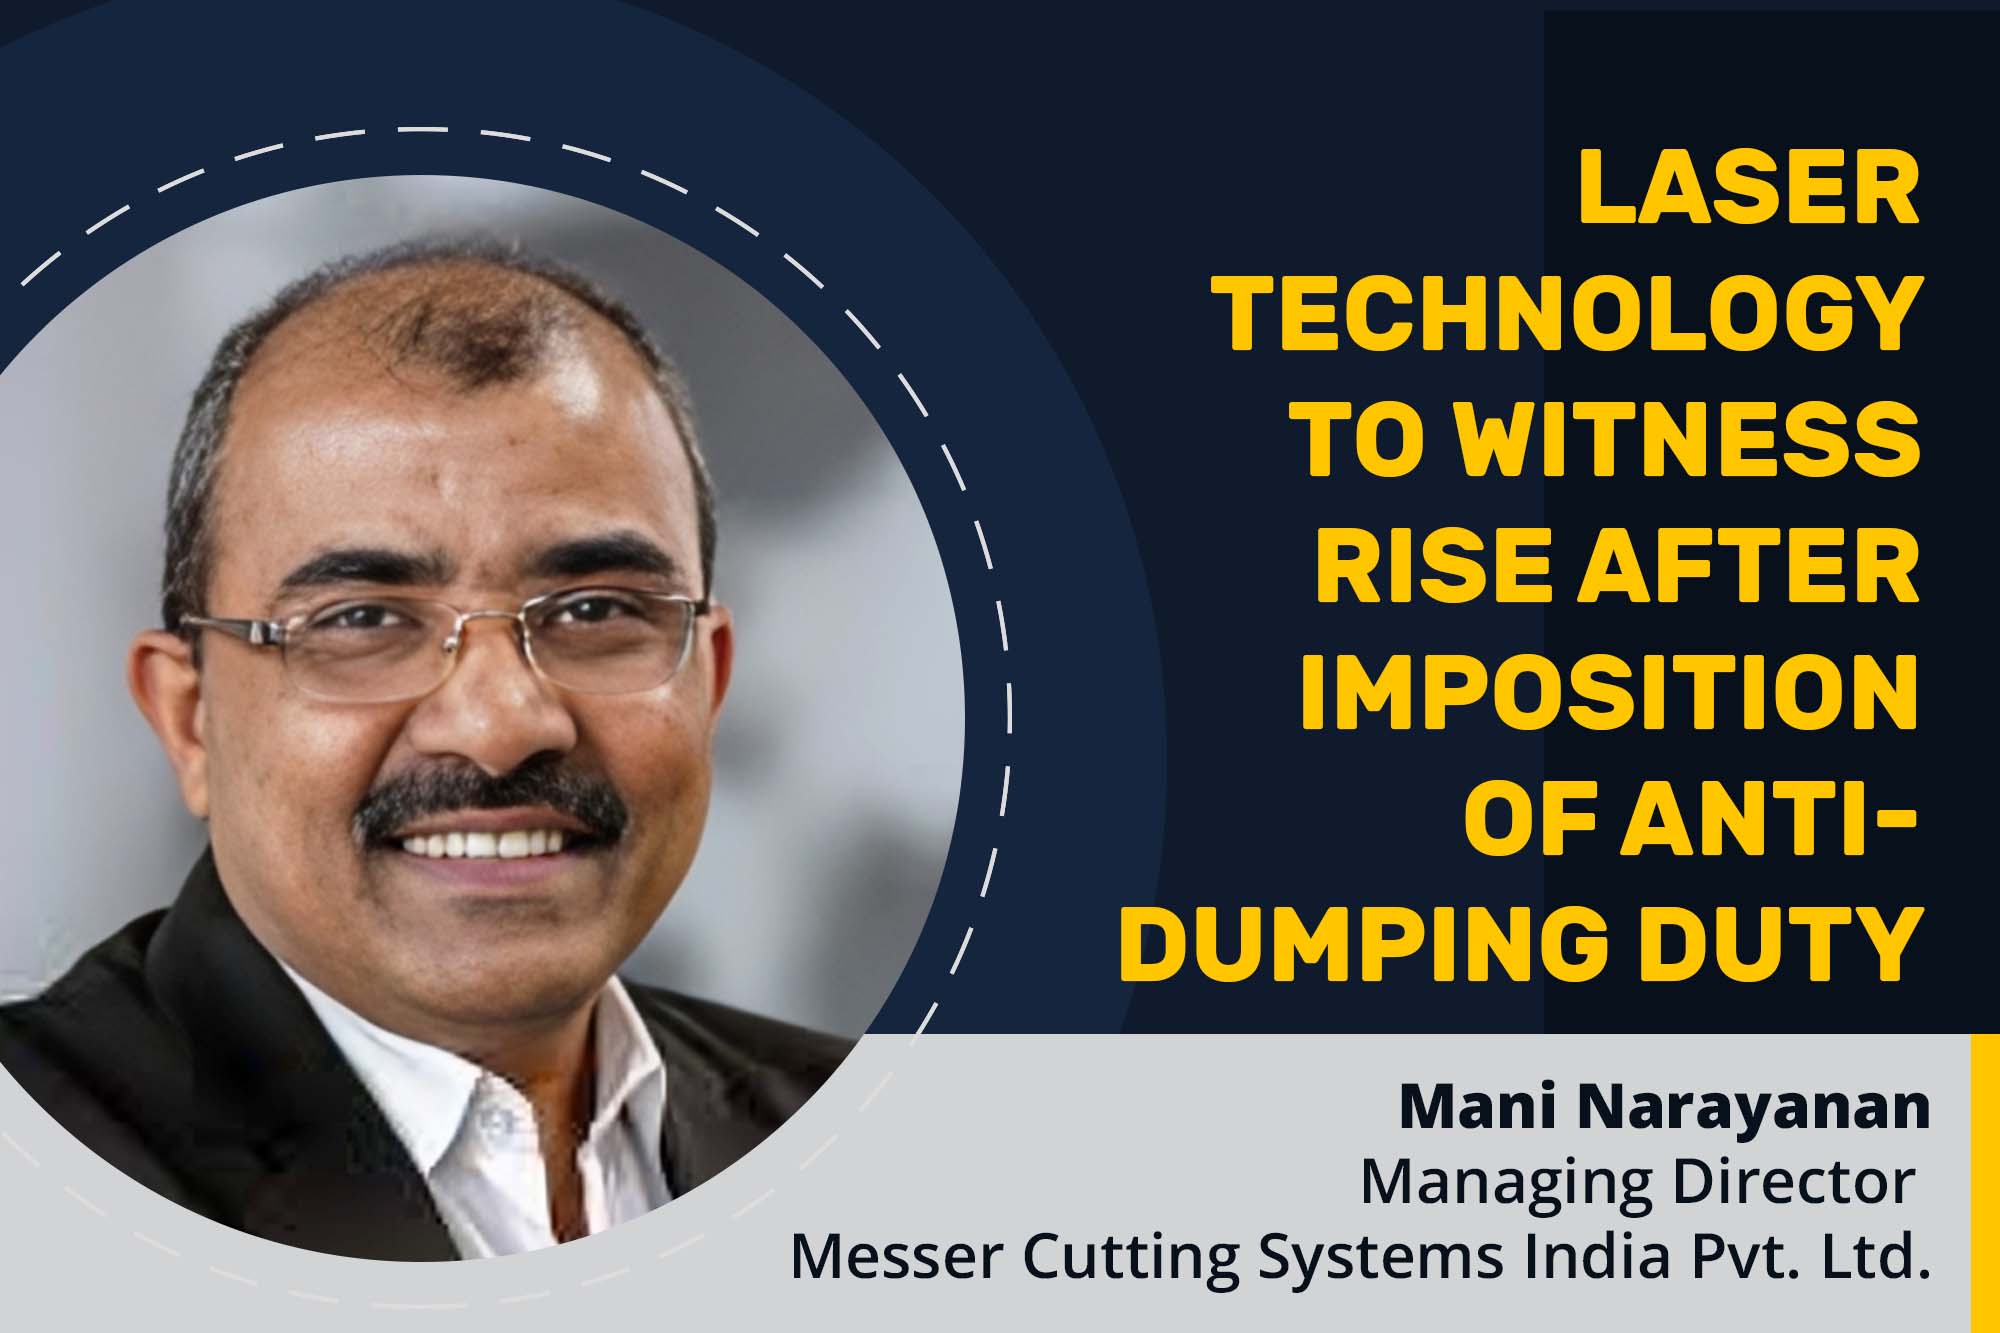 Laser technology to witness rise after imposition of anti-dumping duty